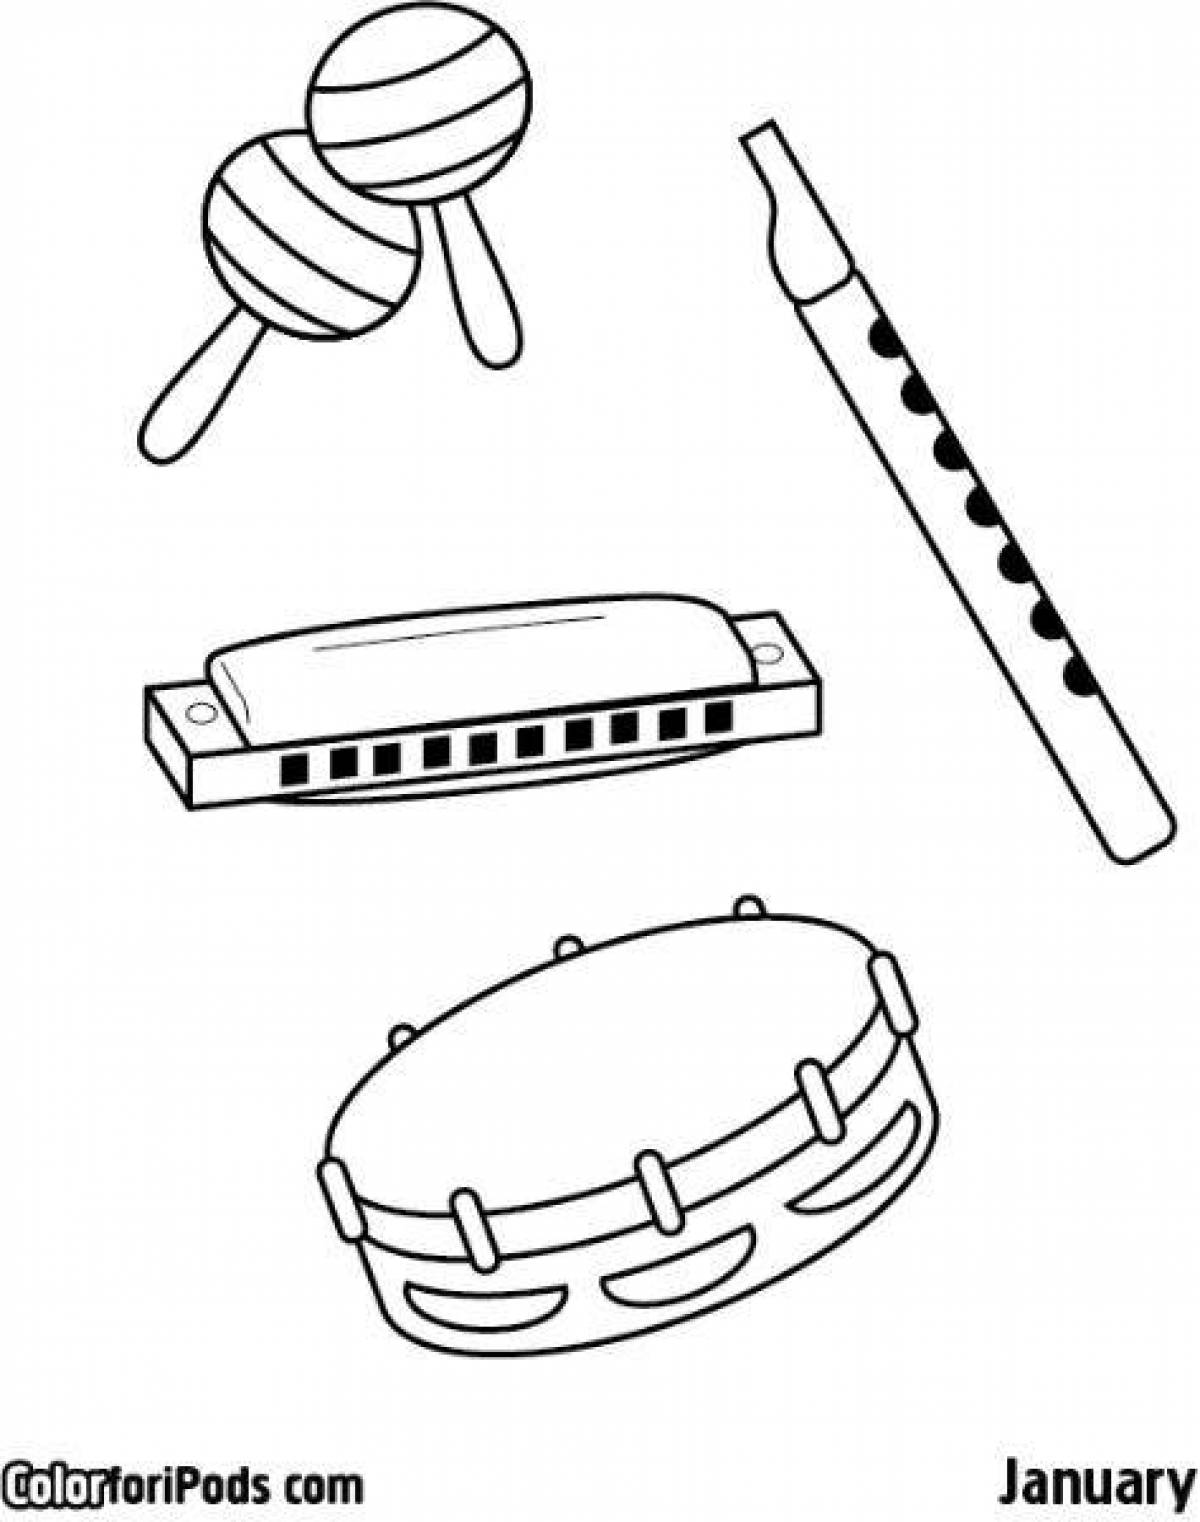 Coloring page cute russian folk musical instruments